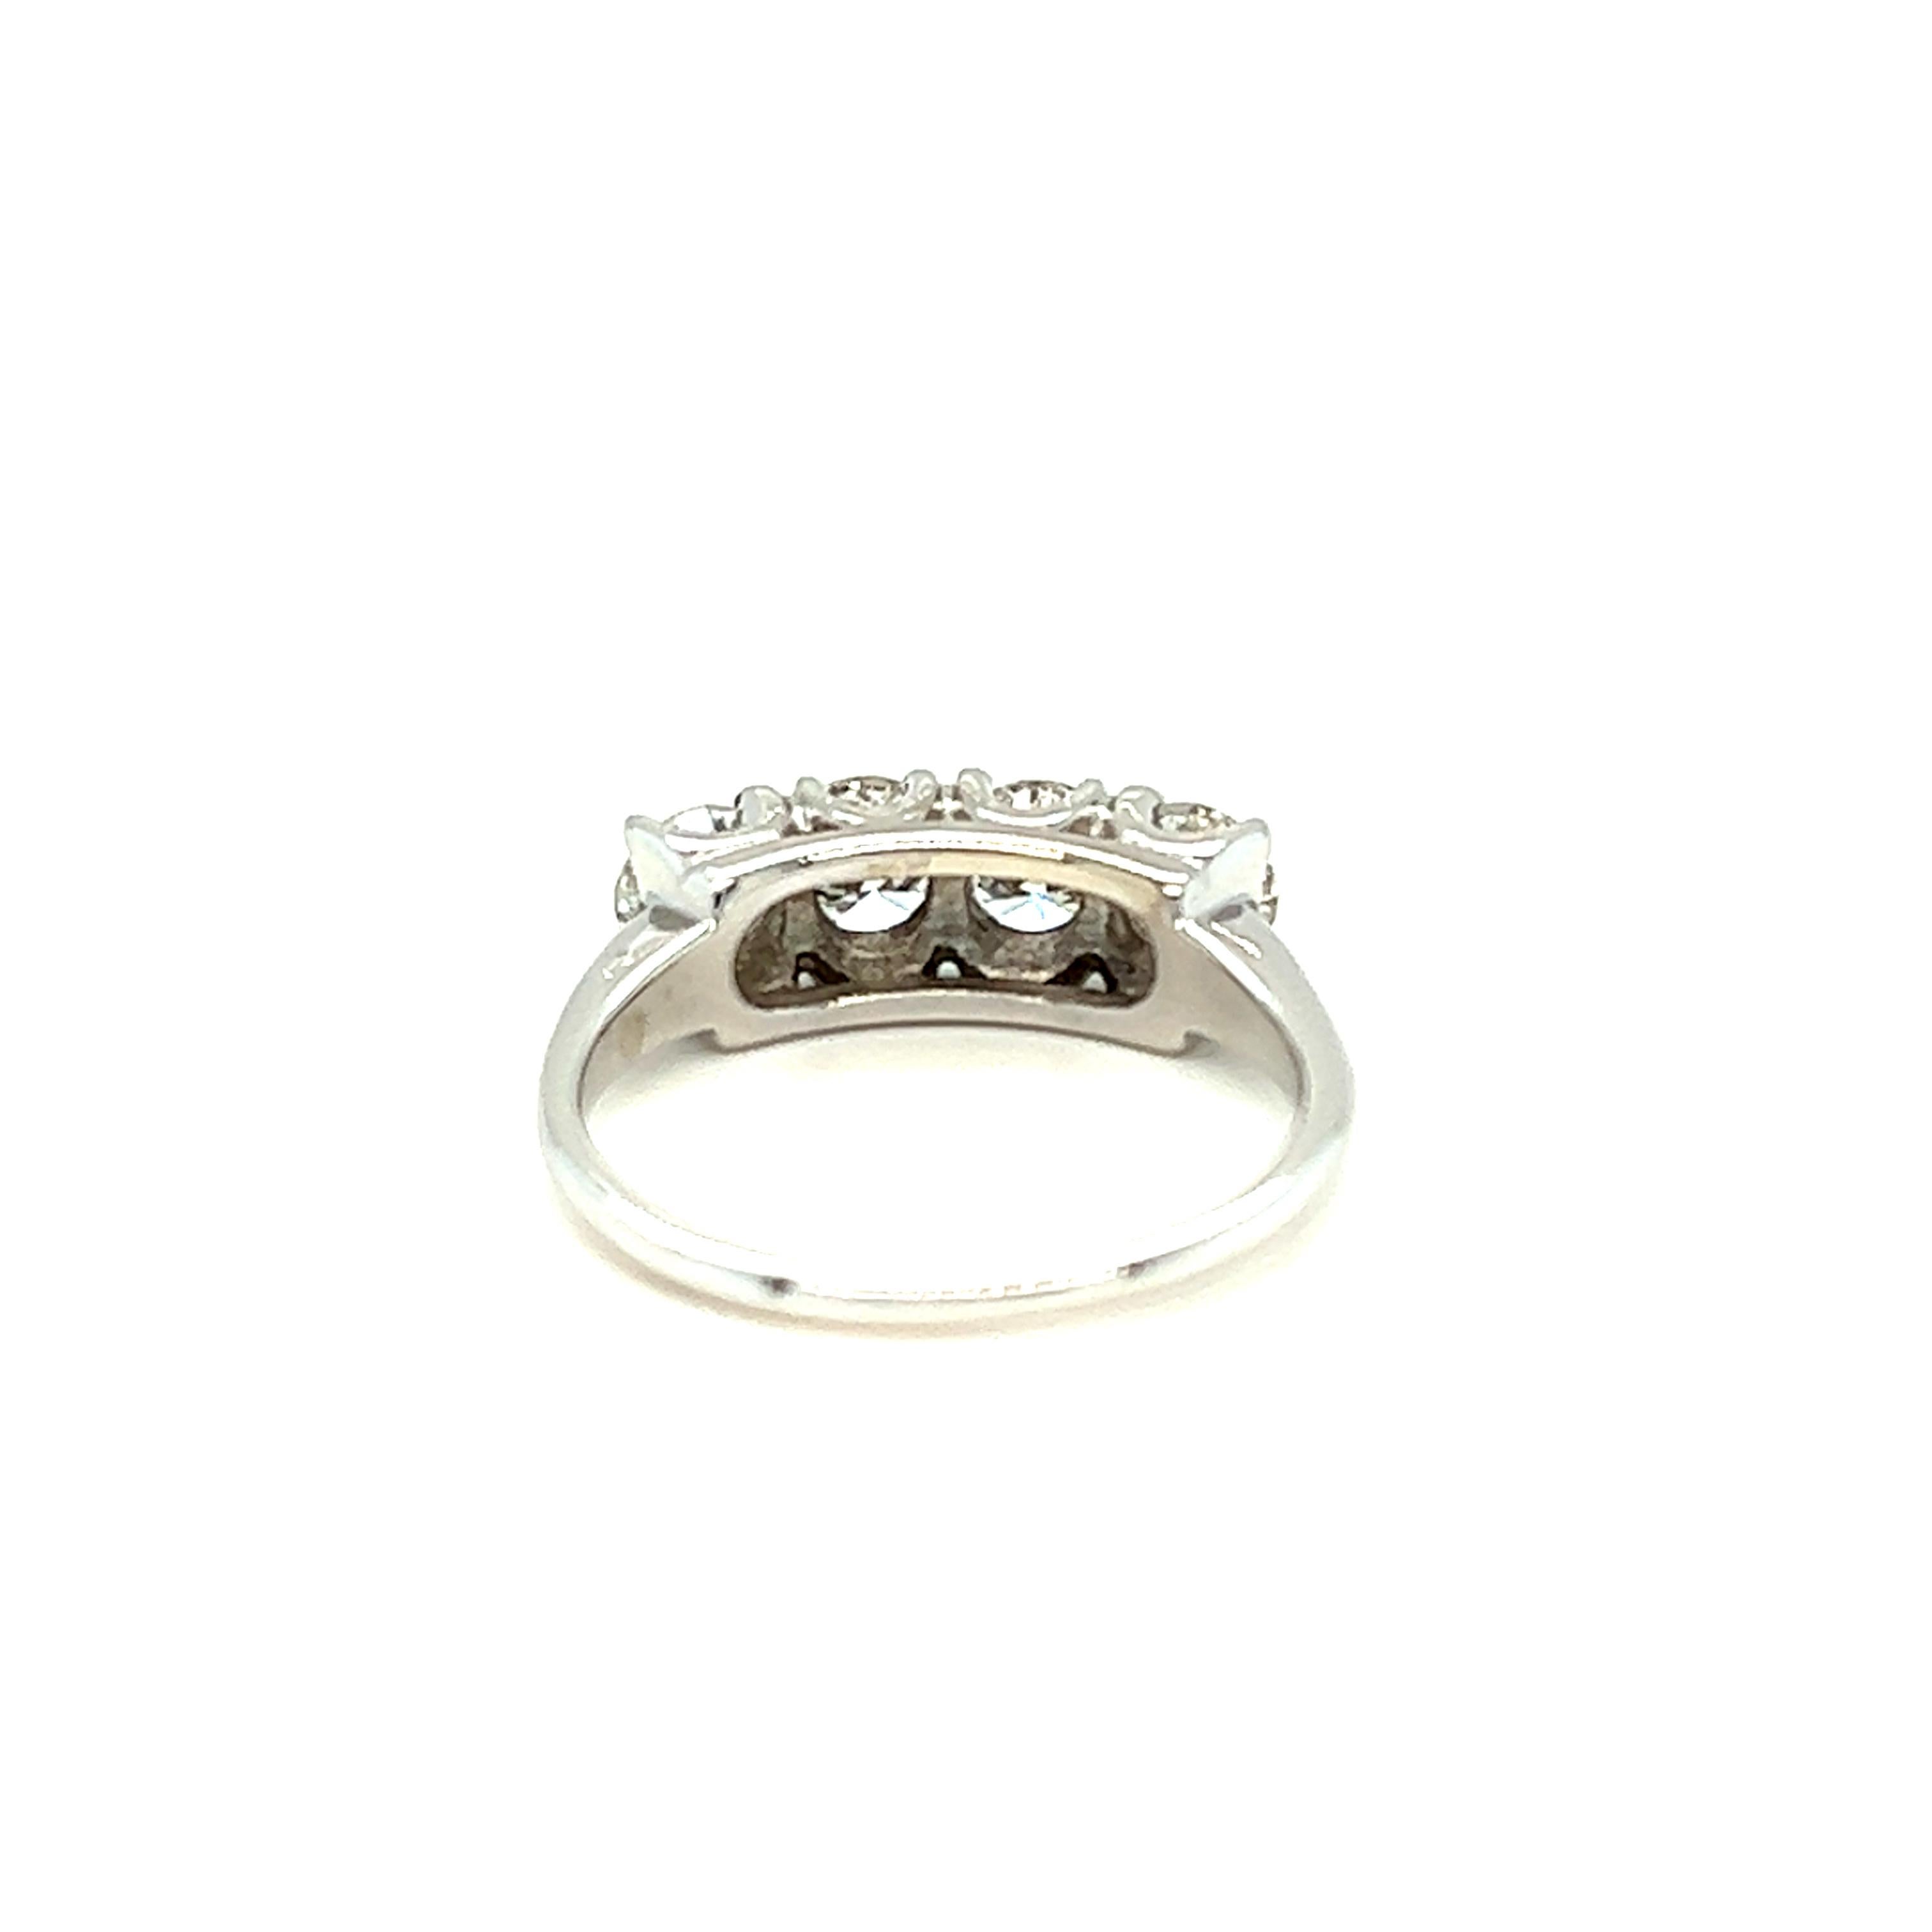 4 Diamond Single Row Ring 1.20 Carat H VS2 Diamonds in 14k White Gold In Good Condition For Sale In beverly hills, CA